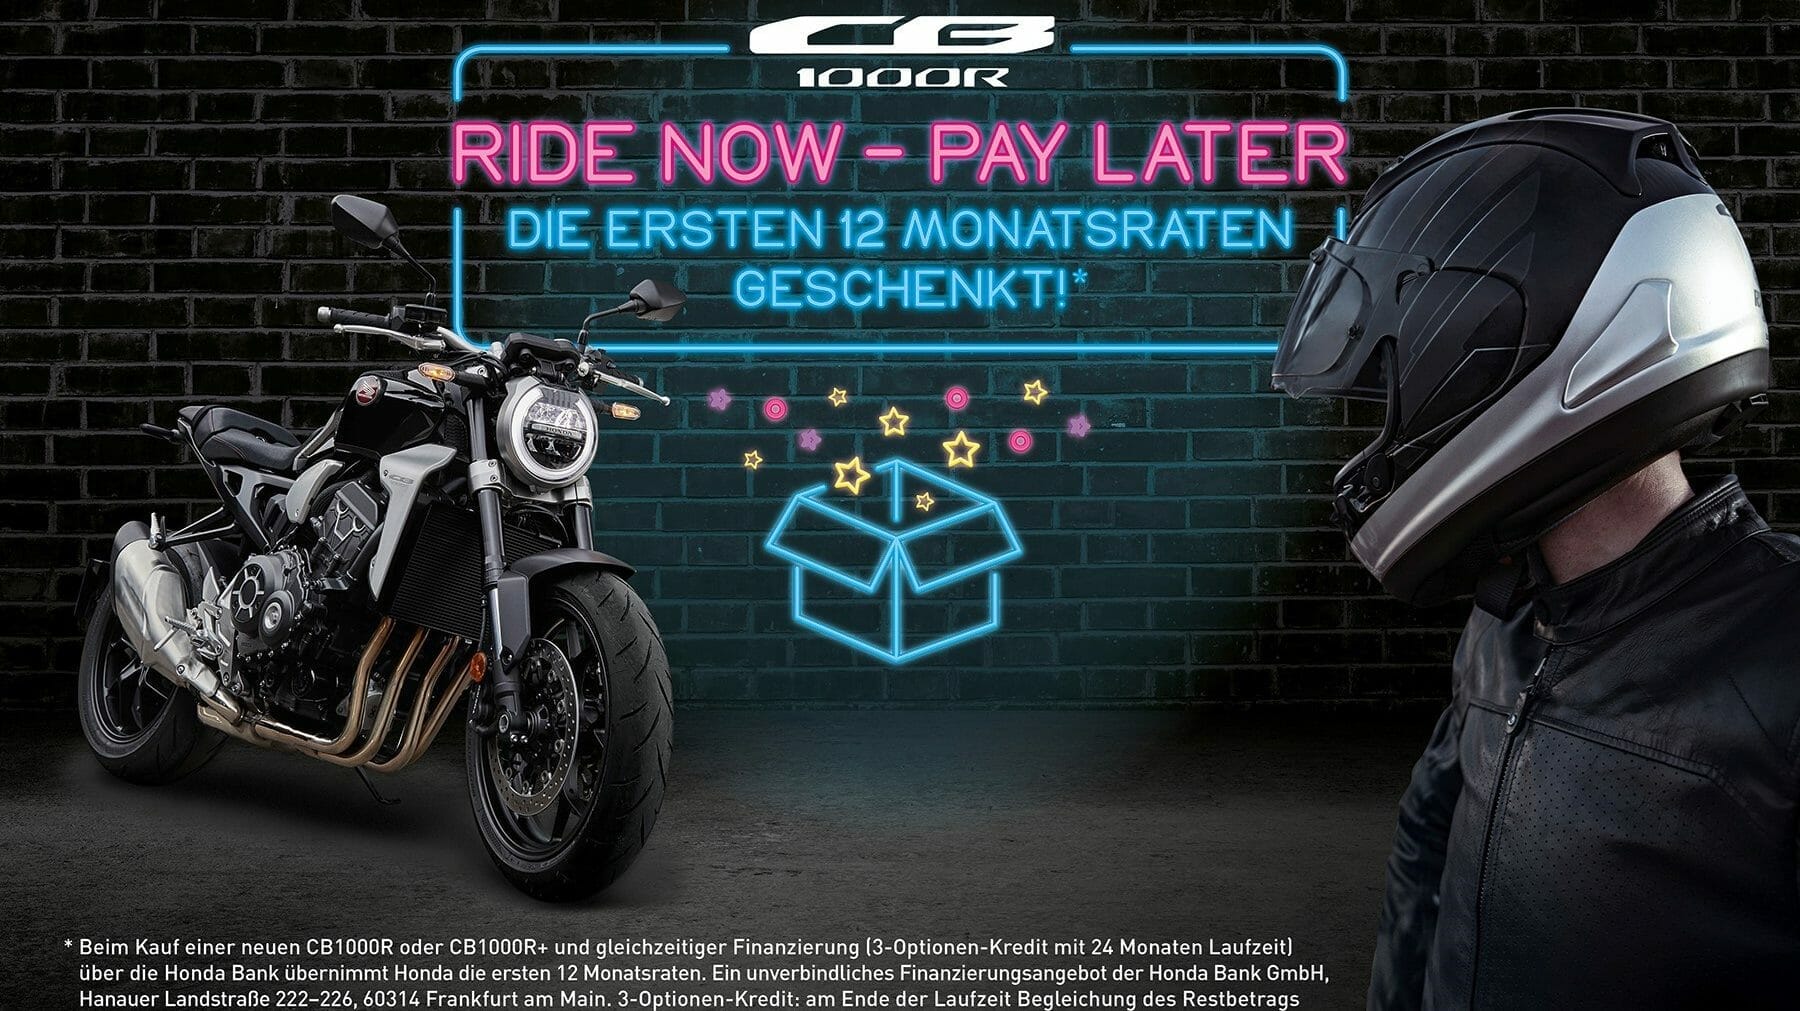 CB1000R – Ride now, pay later